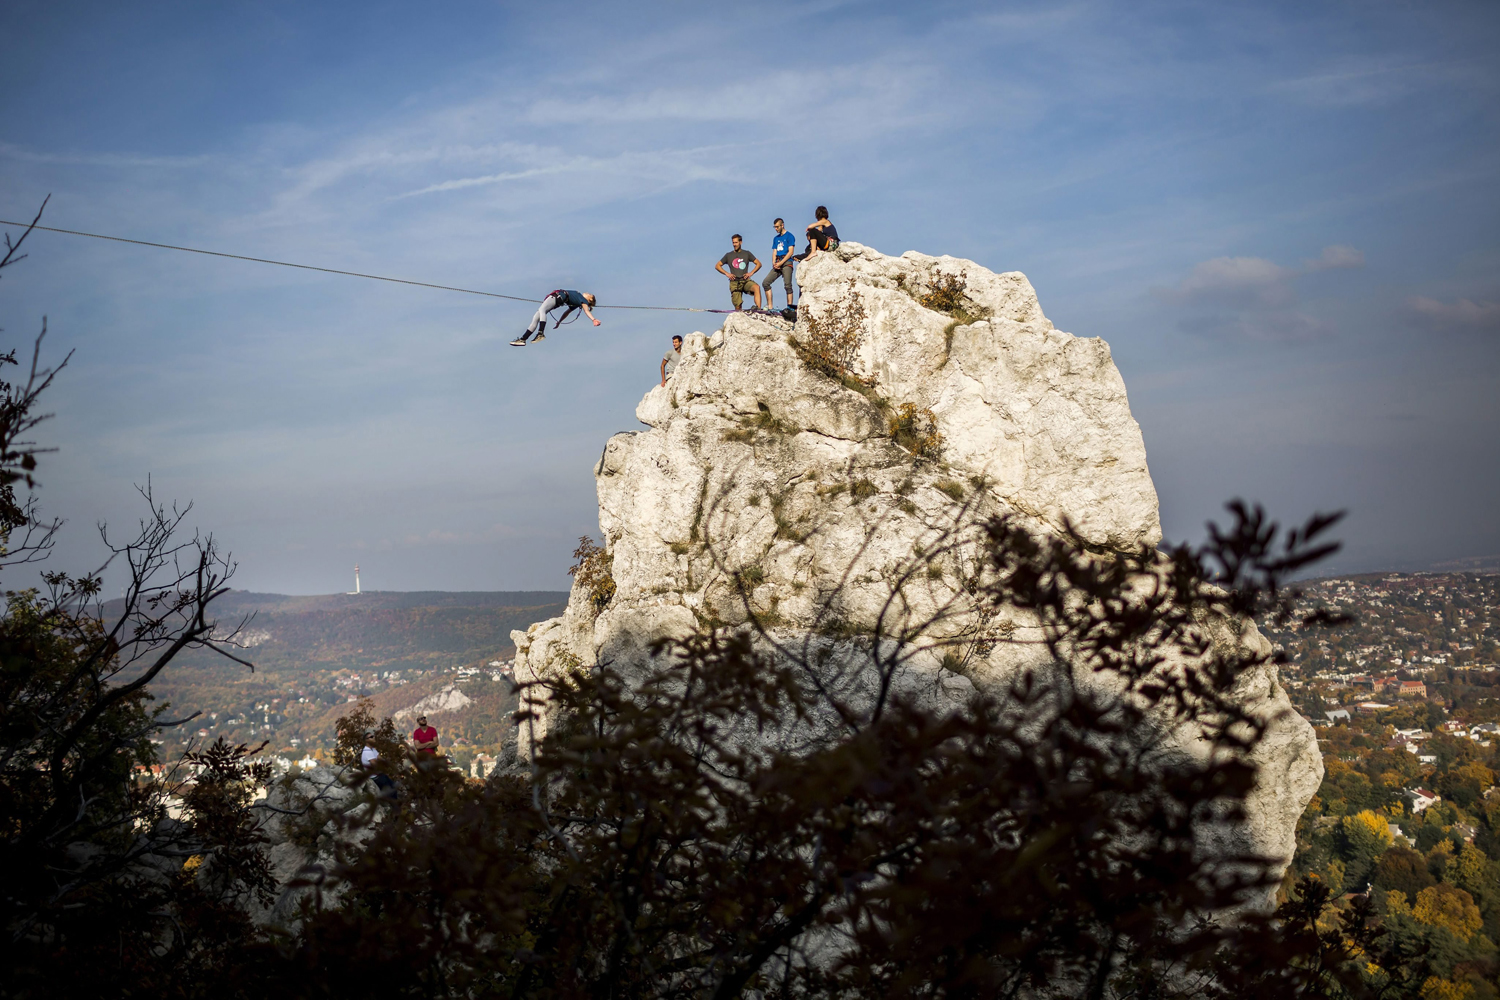 Slackliners in Budapest